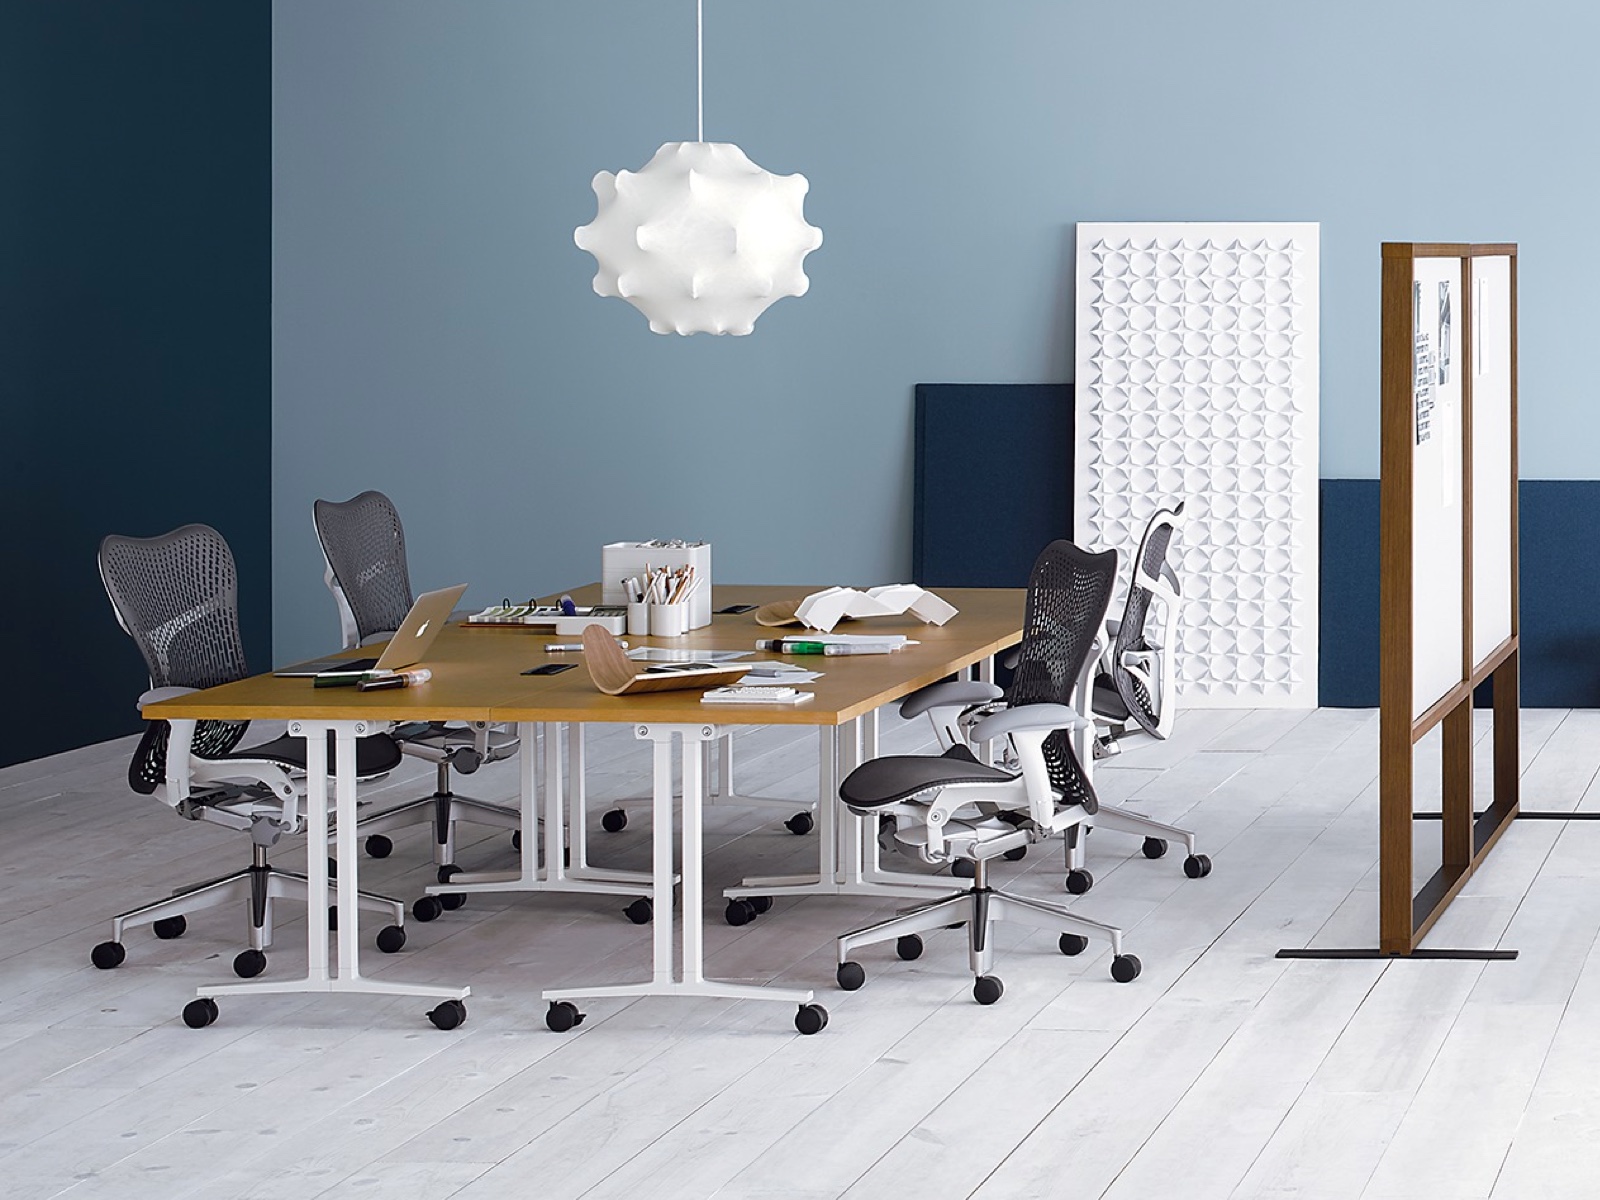 A room with wood surface and white leg Everywhere Tables configured in a workshop setting. 